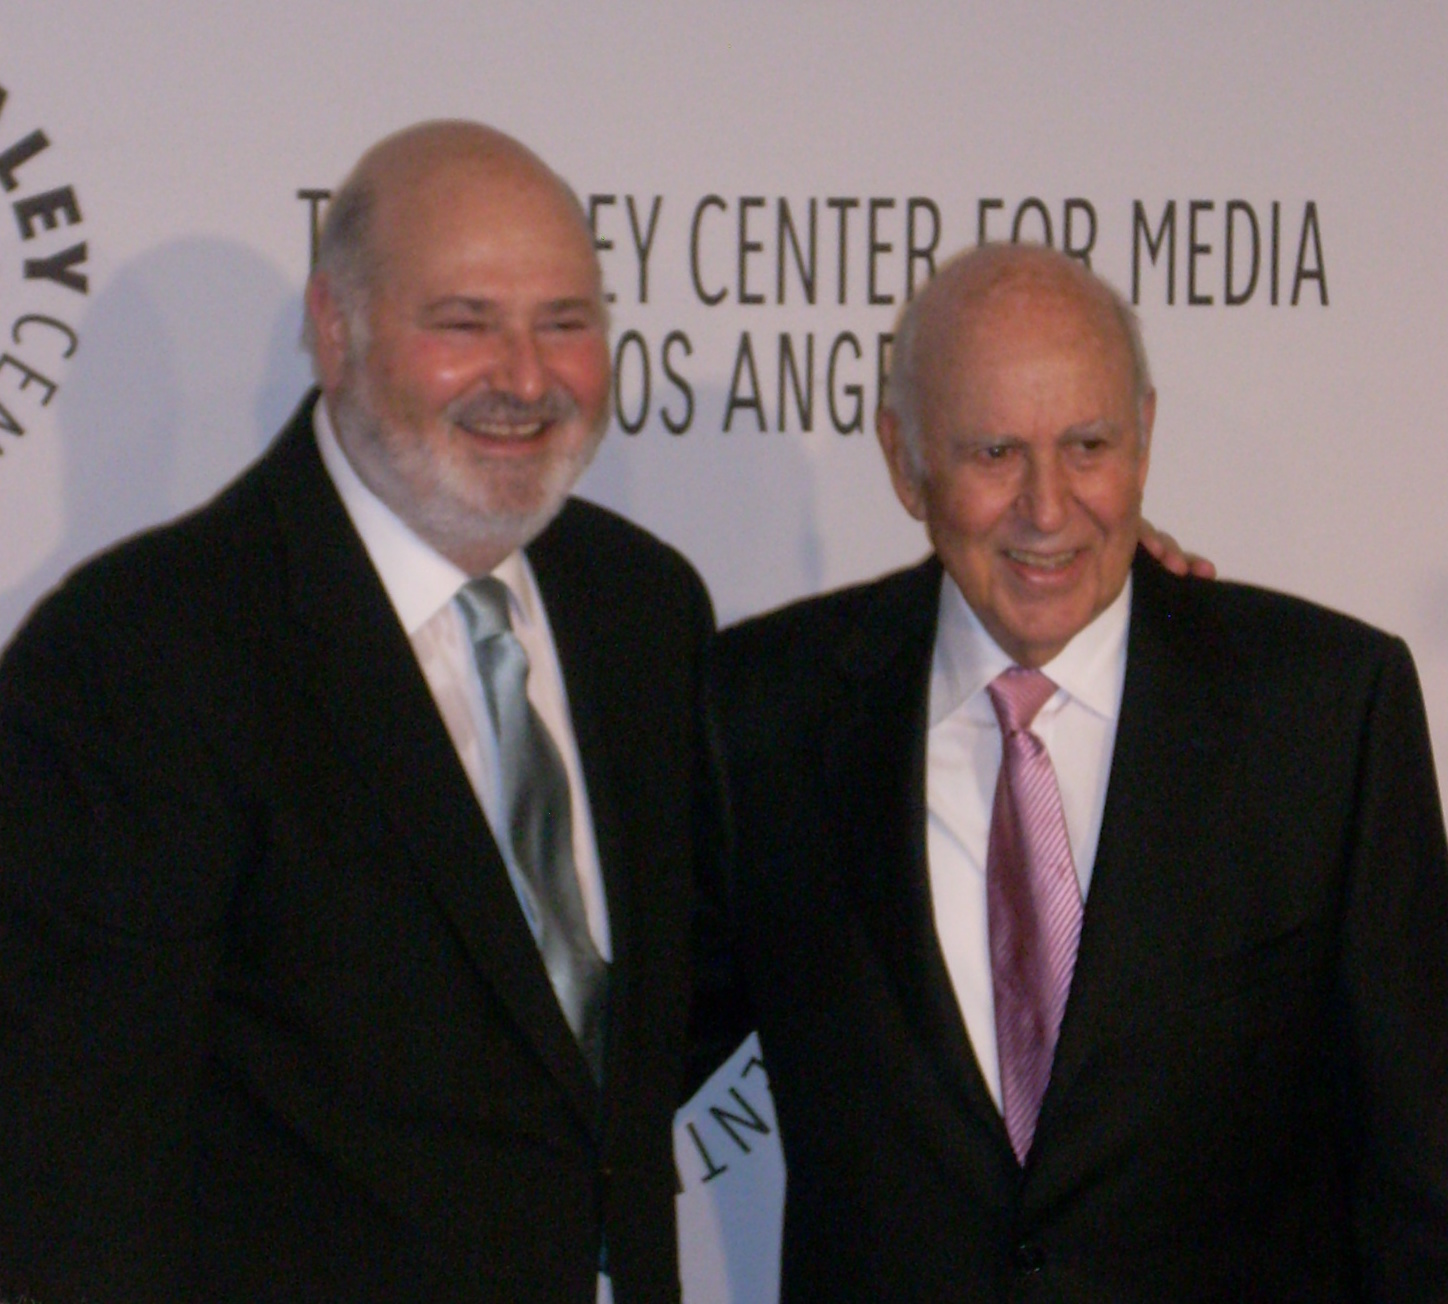 Rob and Carl Reiner